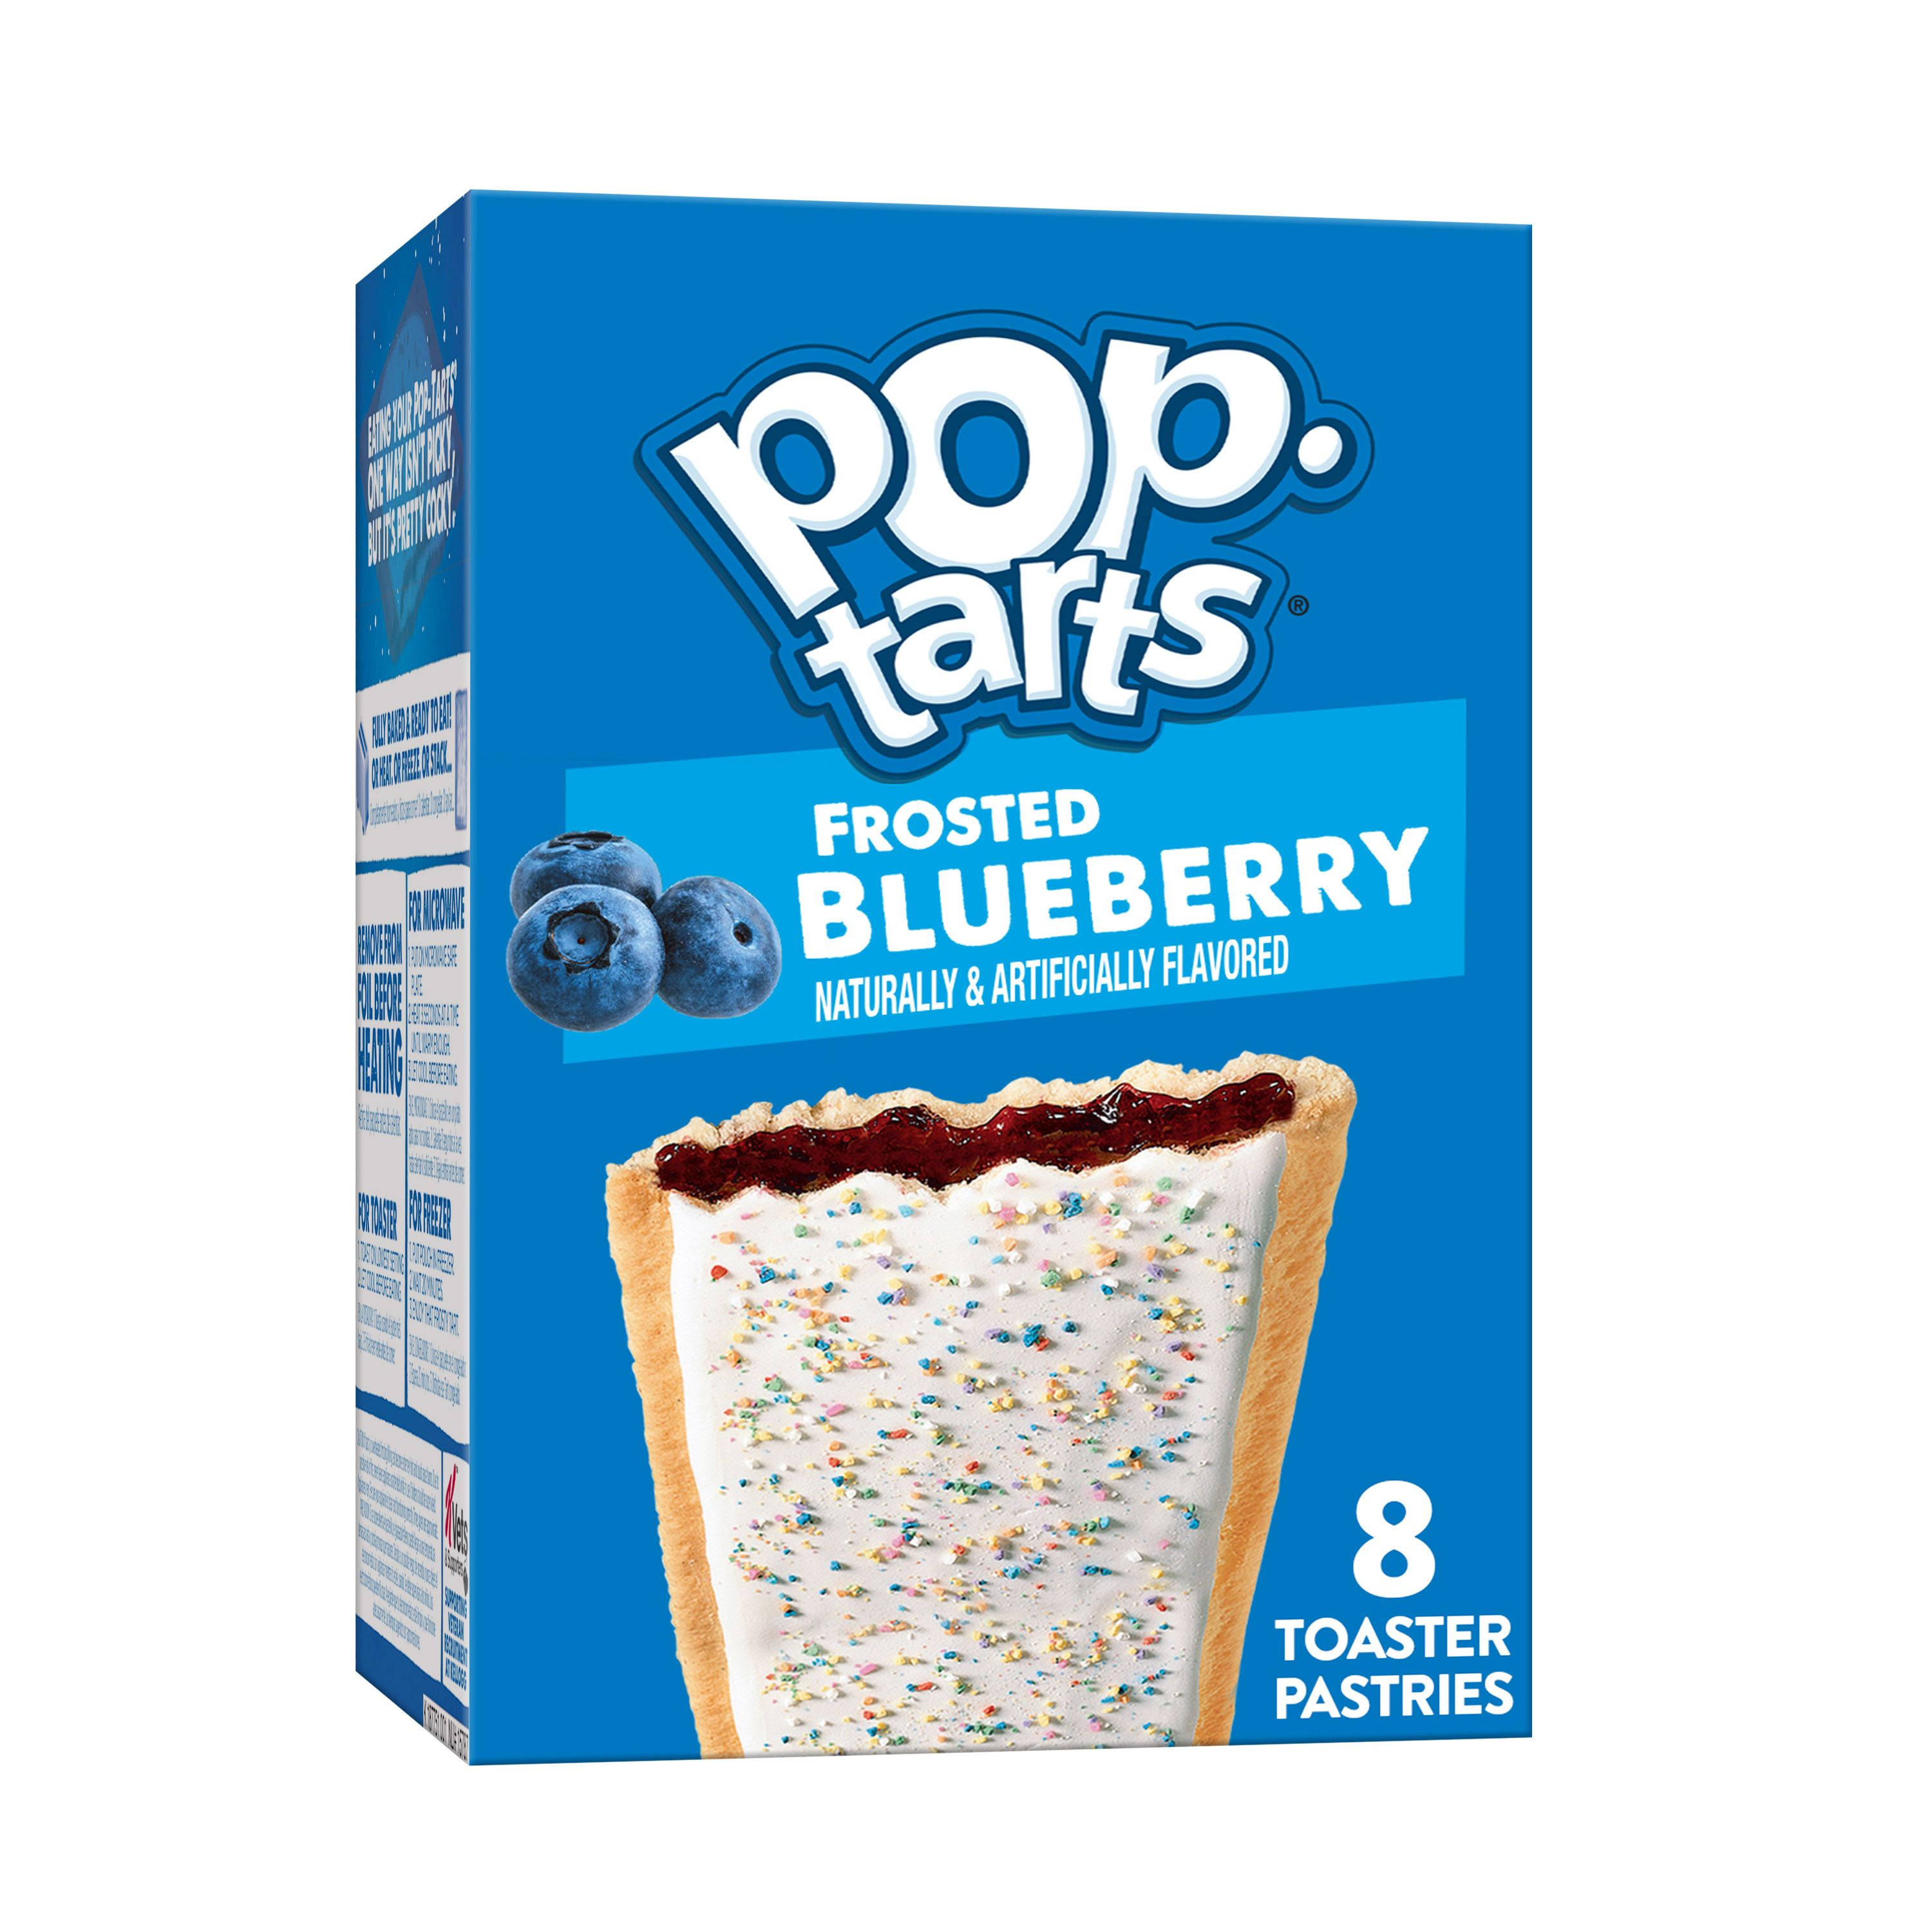 Pop-Tarts Toaster Pastries, Blueberry, Frosted - 8 toaster pastries, 13.5 oz